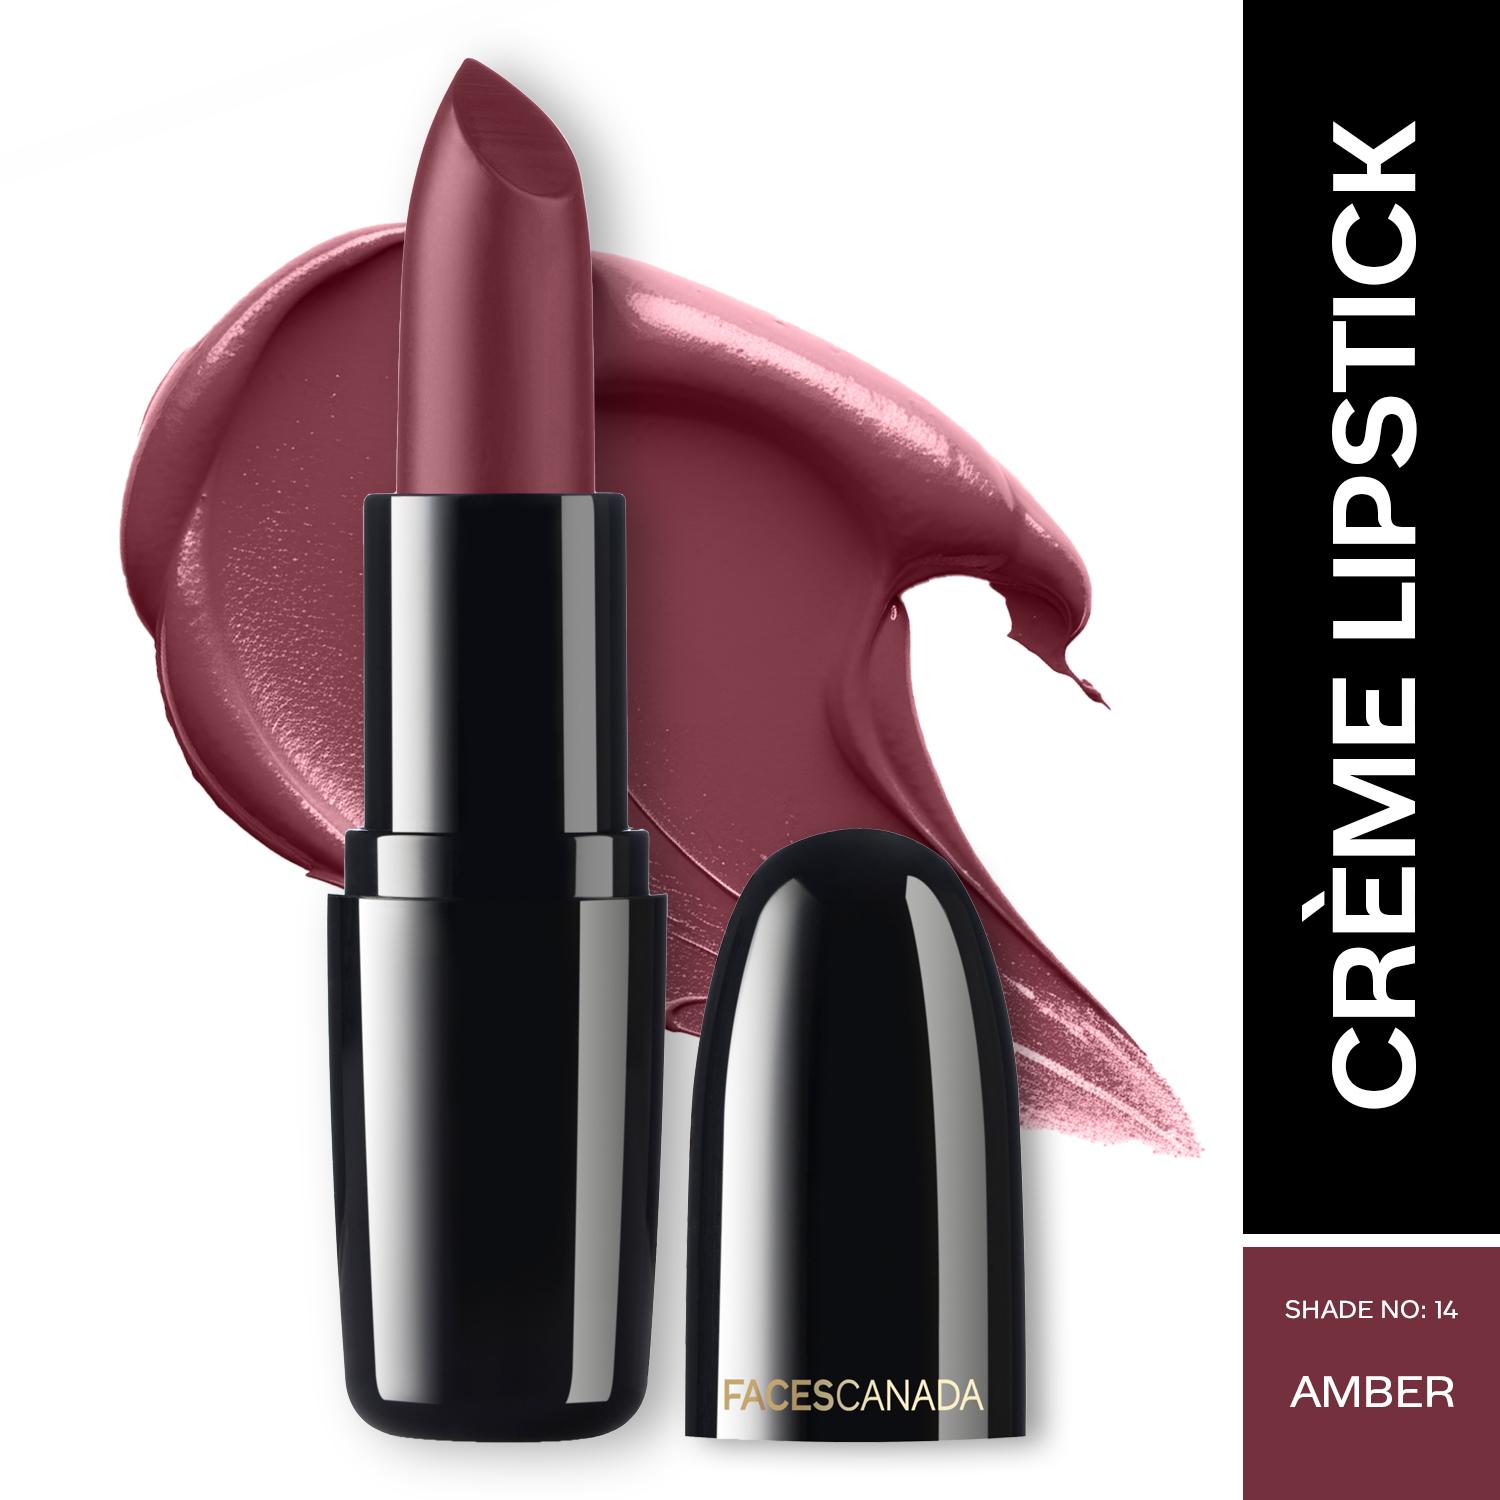 Faces Canada | Faces Canada Weightless Creme Finish Lipstick, Creamy Finish, Hydrated Lips - Amber 14 (4 g)